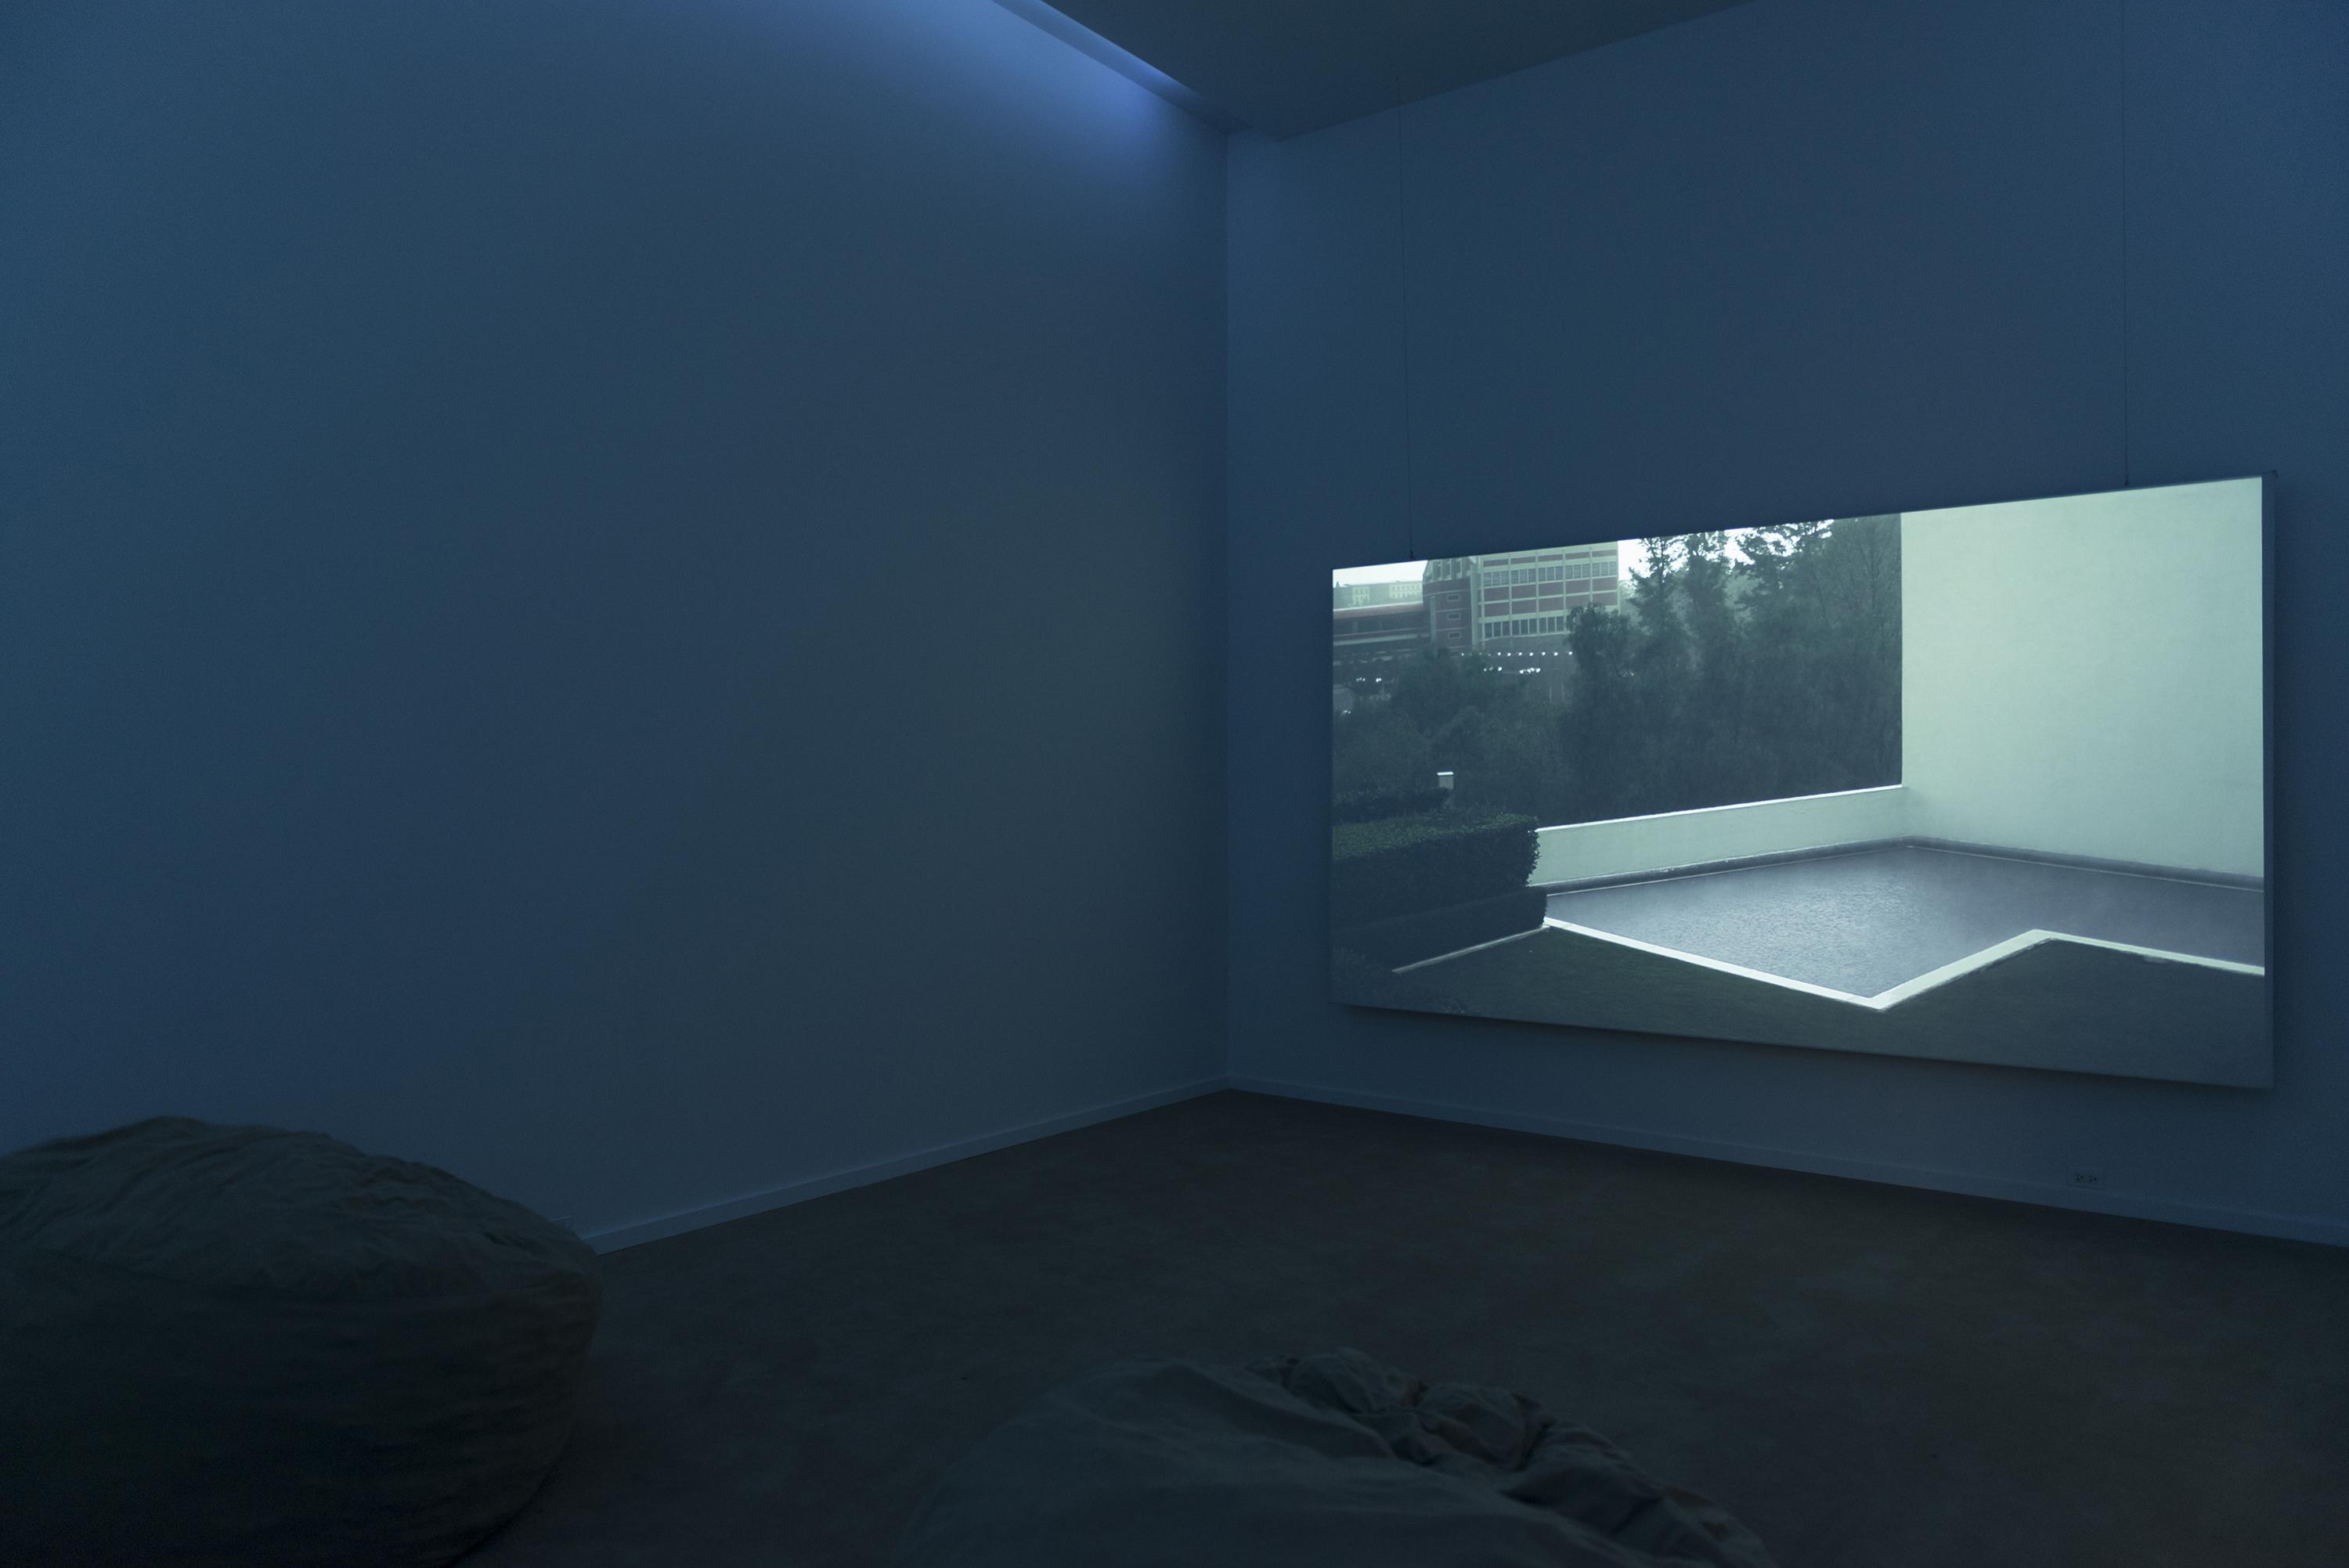 Still of a empty roof terrace projected onto the wall of a dark room with beanbags, just visible on the bottom left.